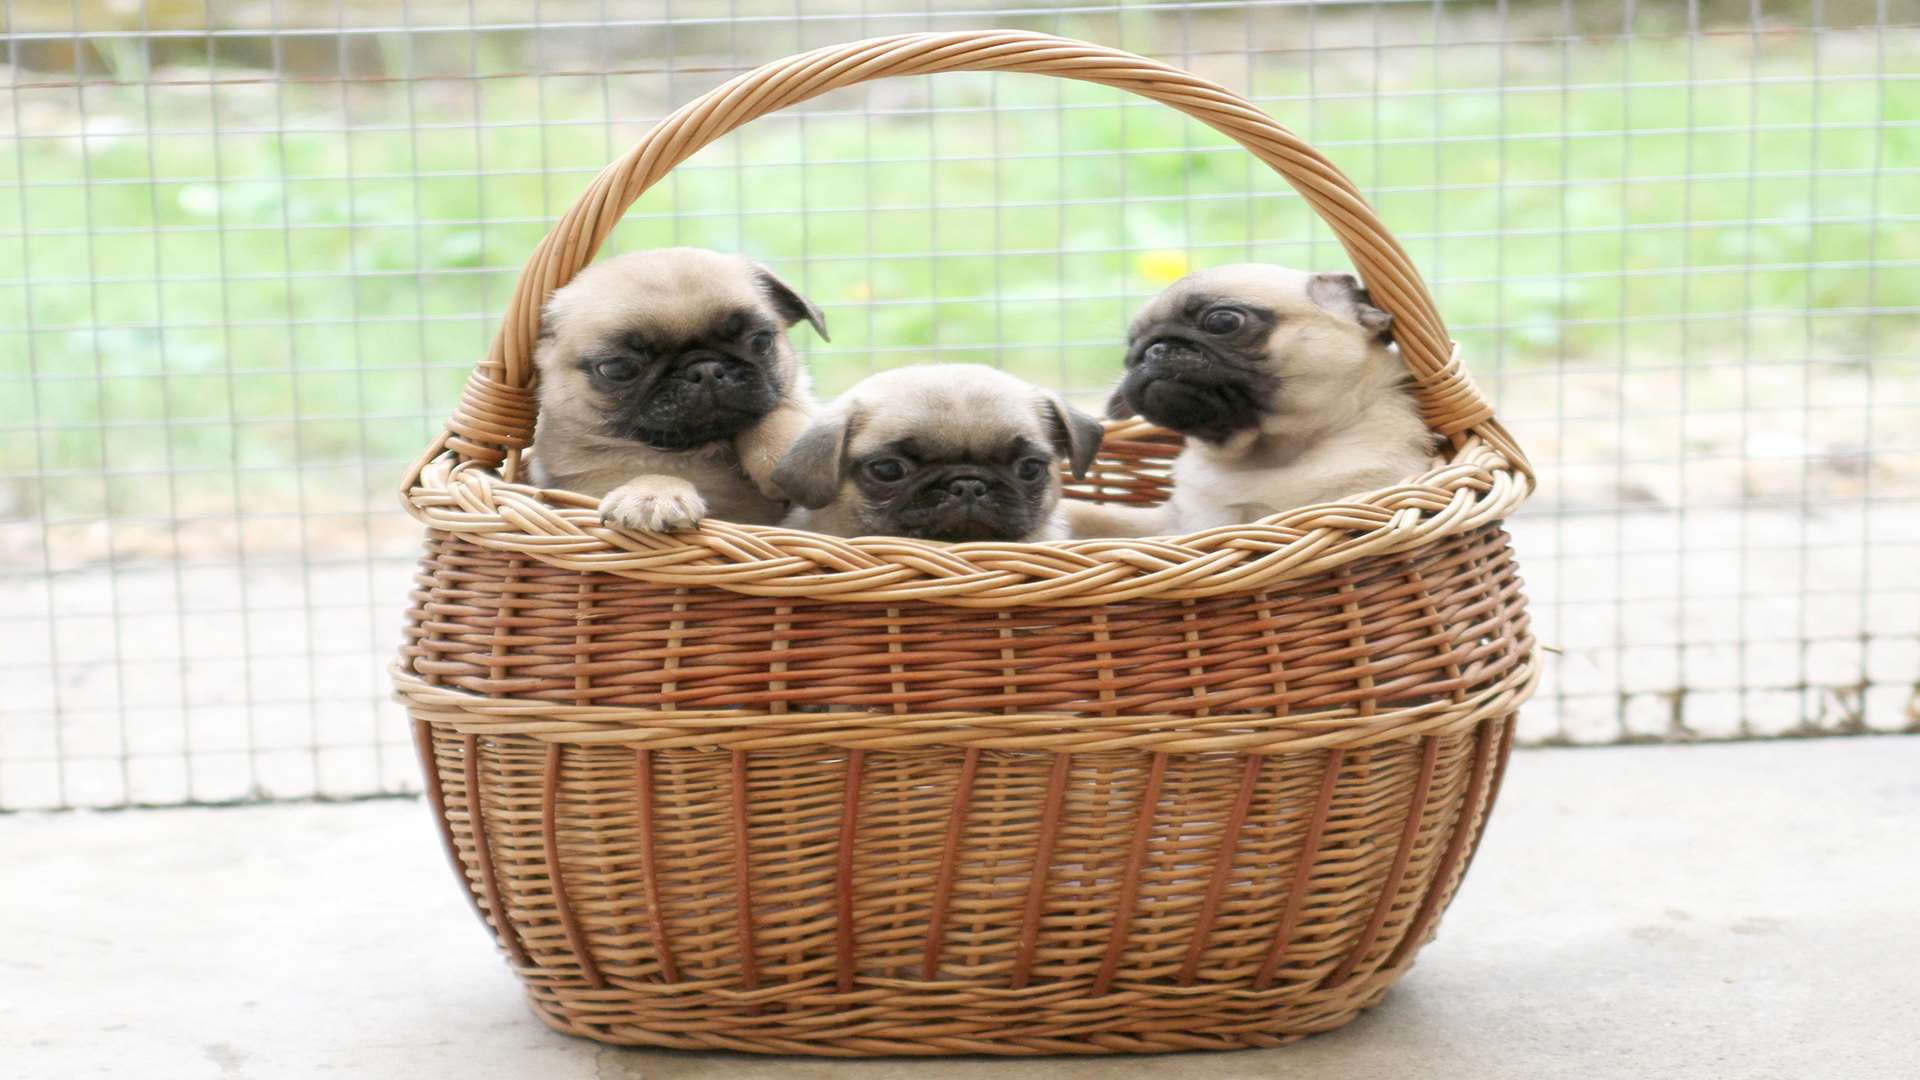 These pug puppies were transported in a wicker basket with cling film over the top